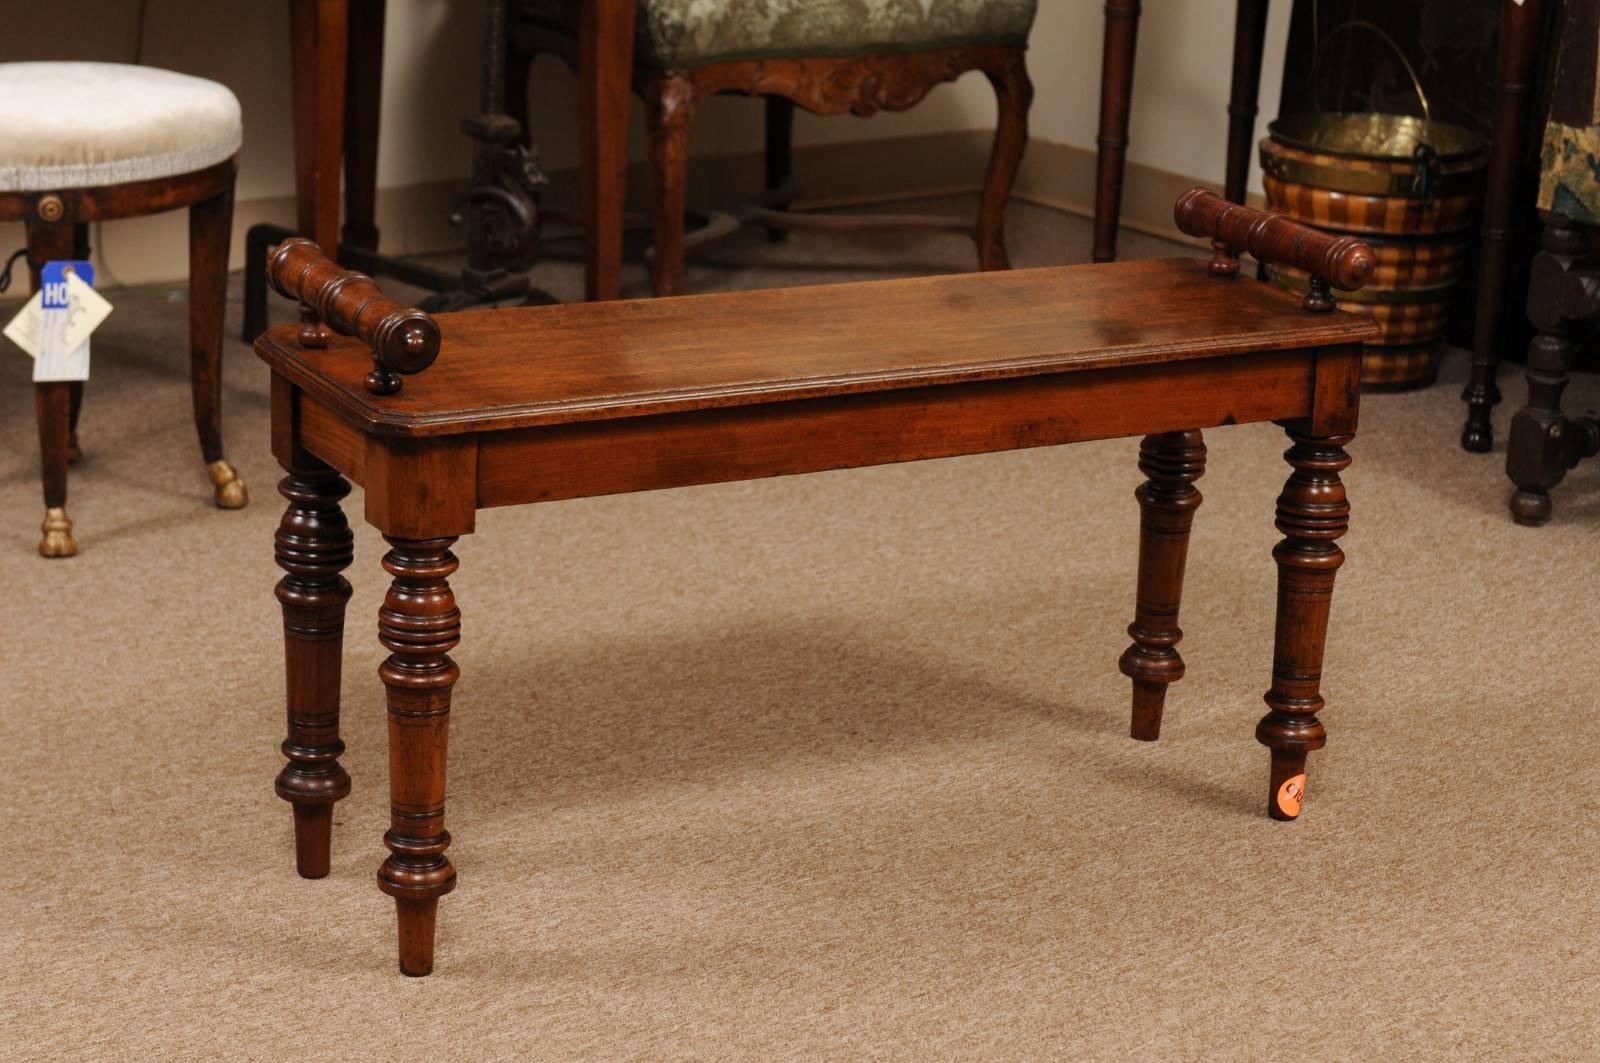 The Regency style hall bench in mahogany with handles and turned legs.